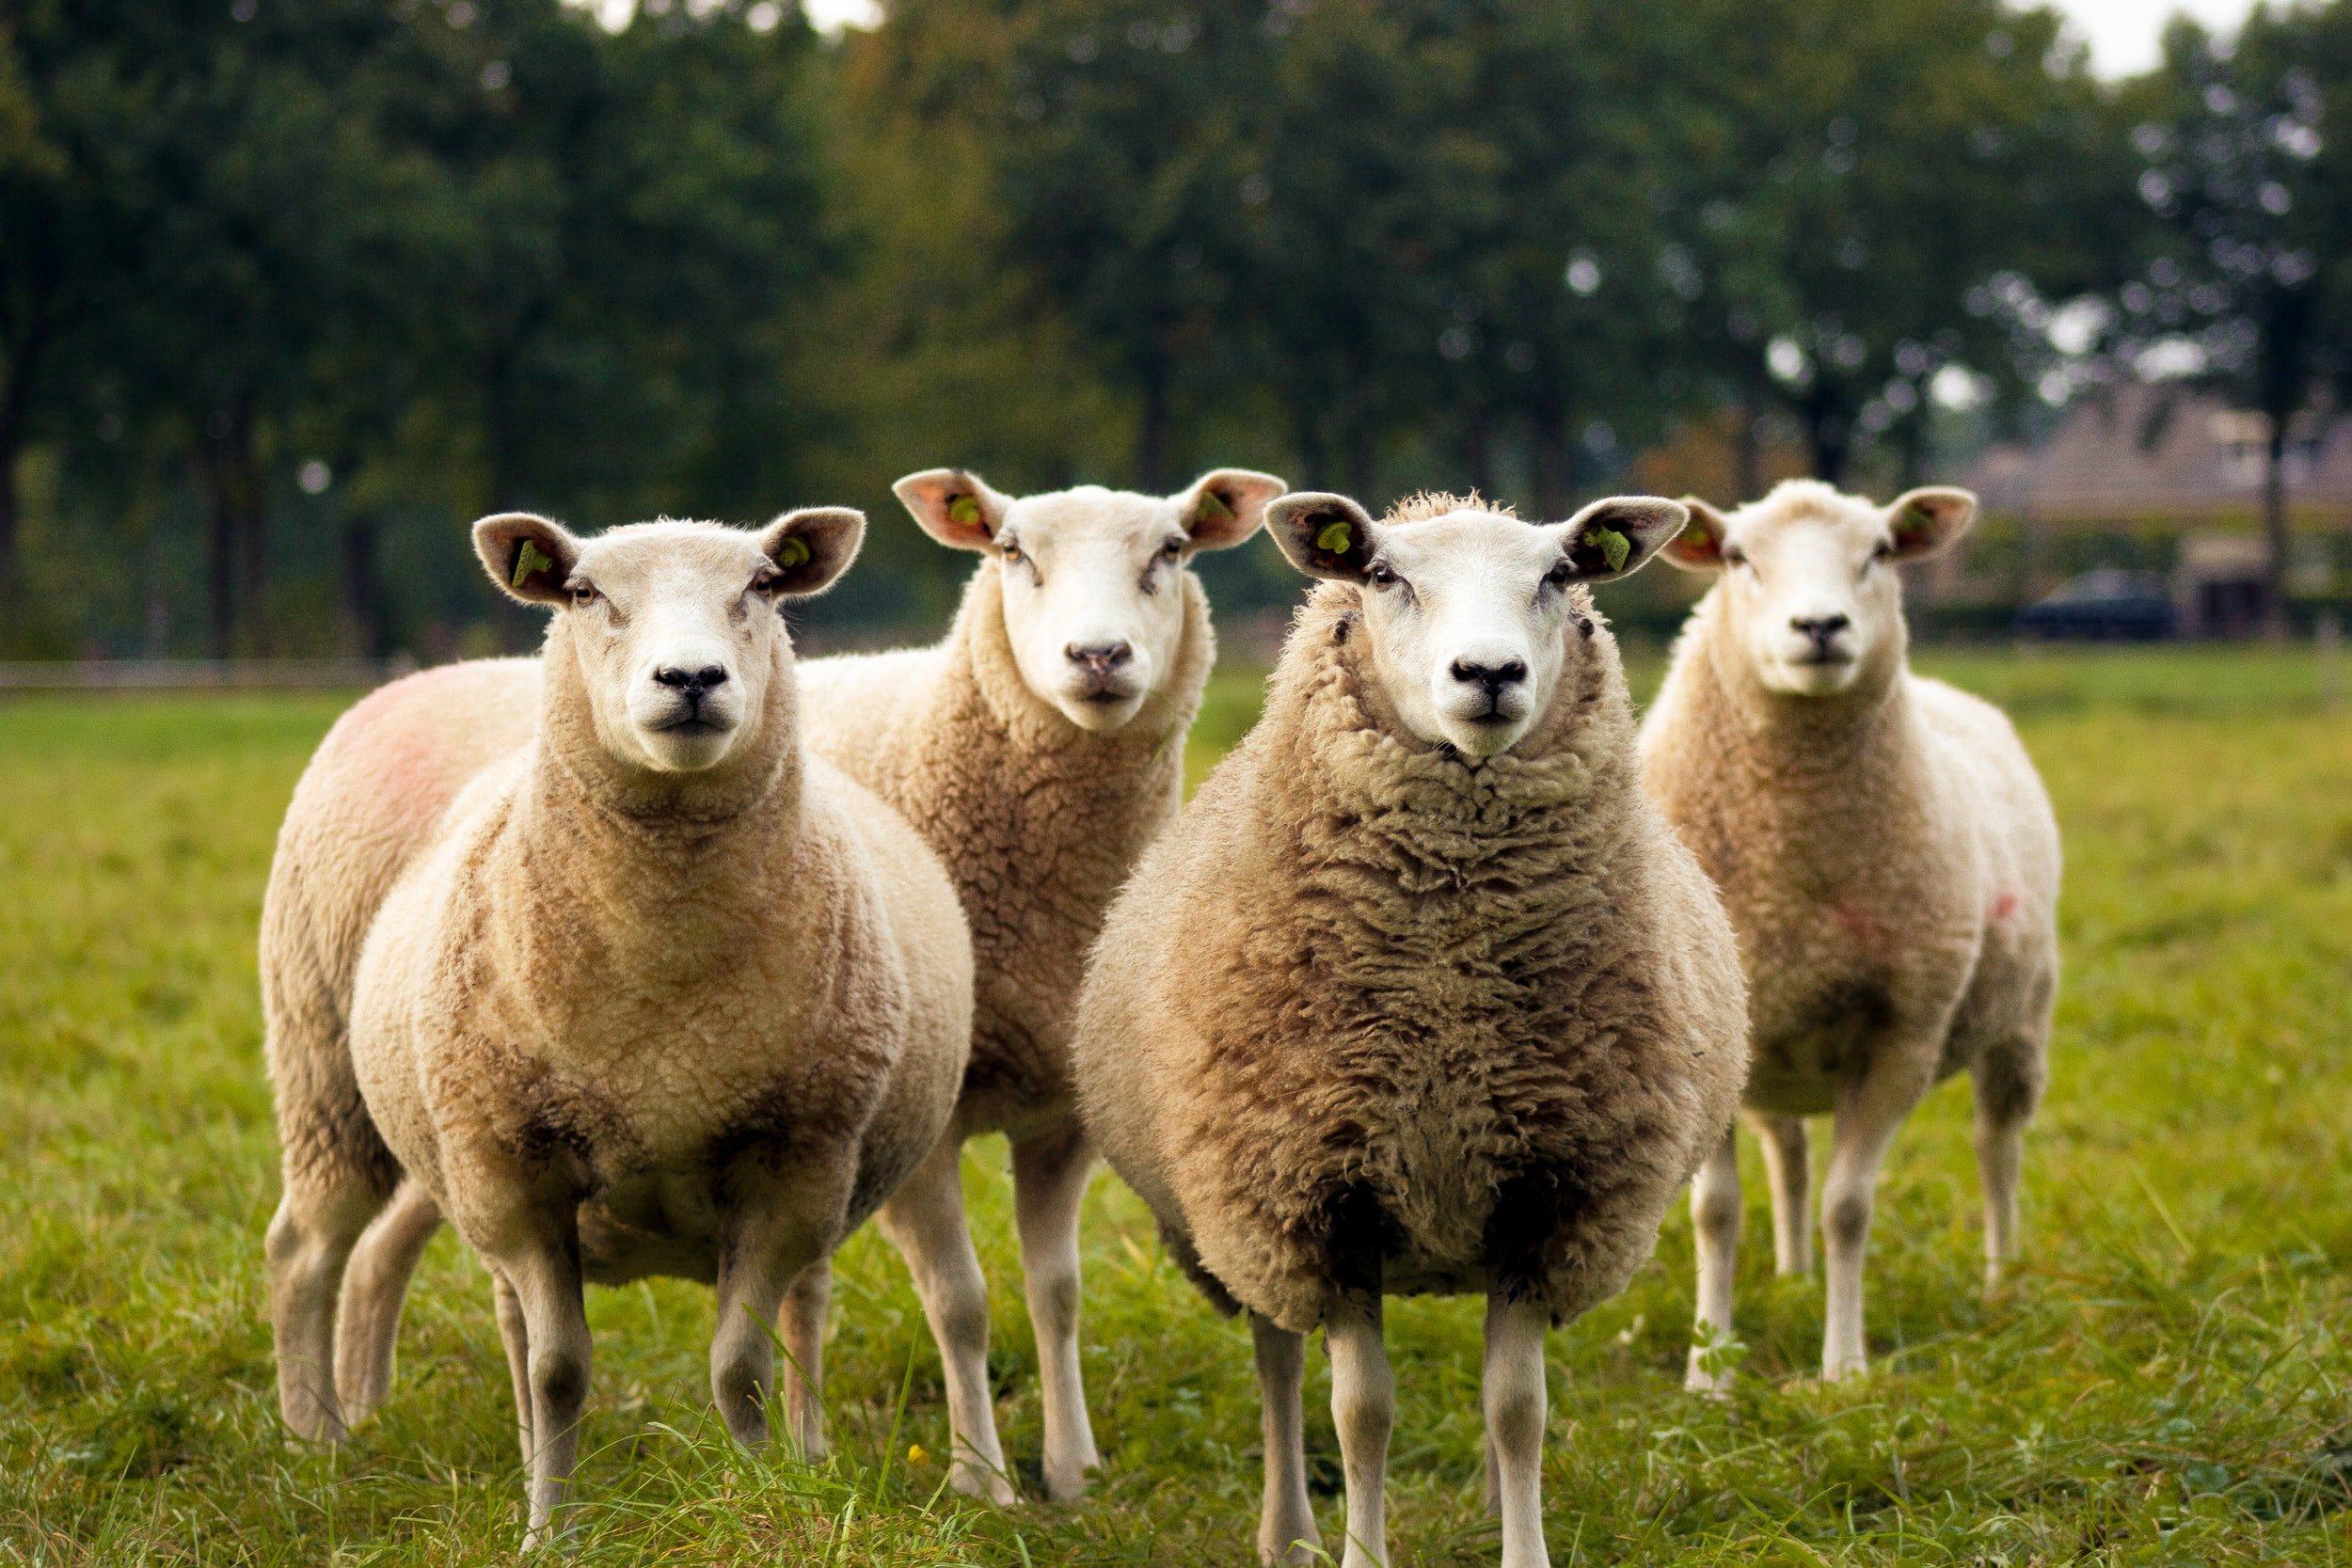 A group of sheep standing in a field